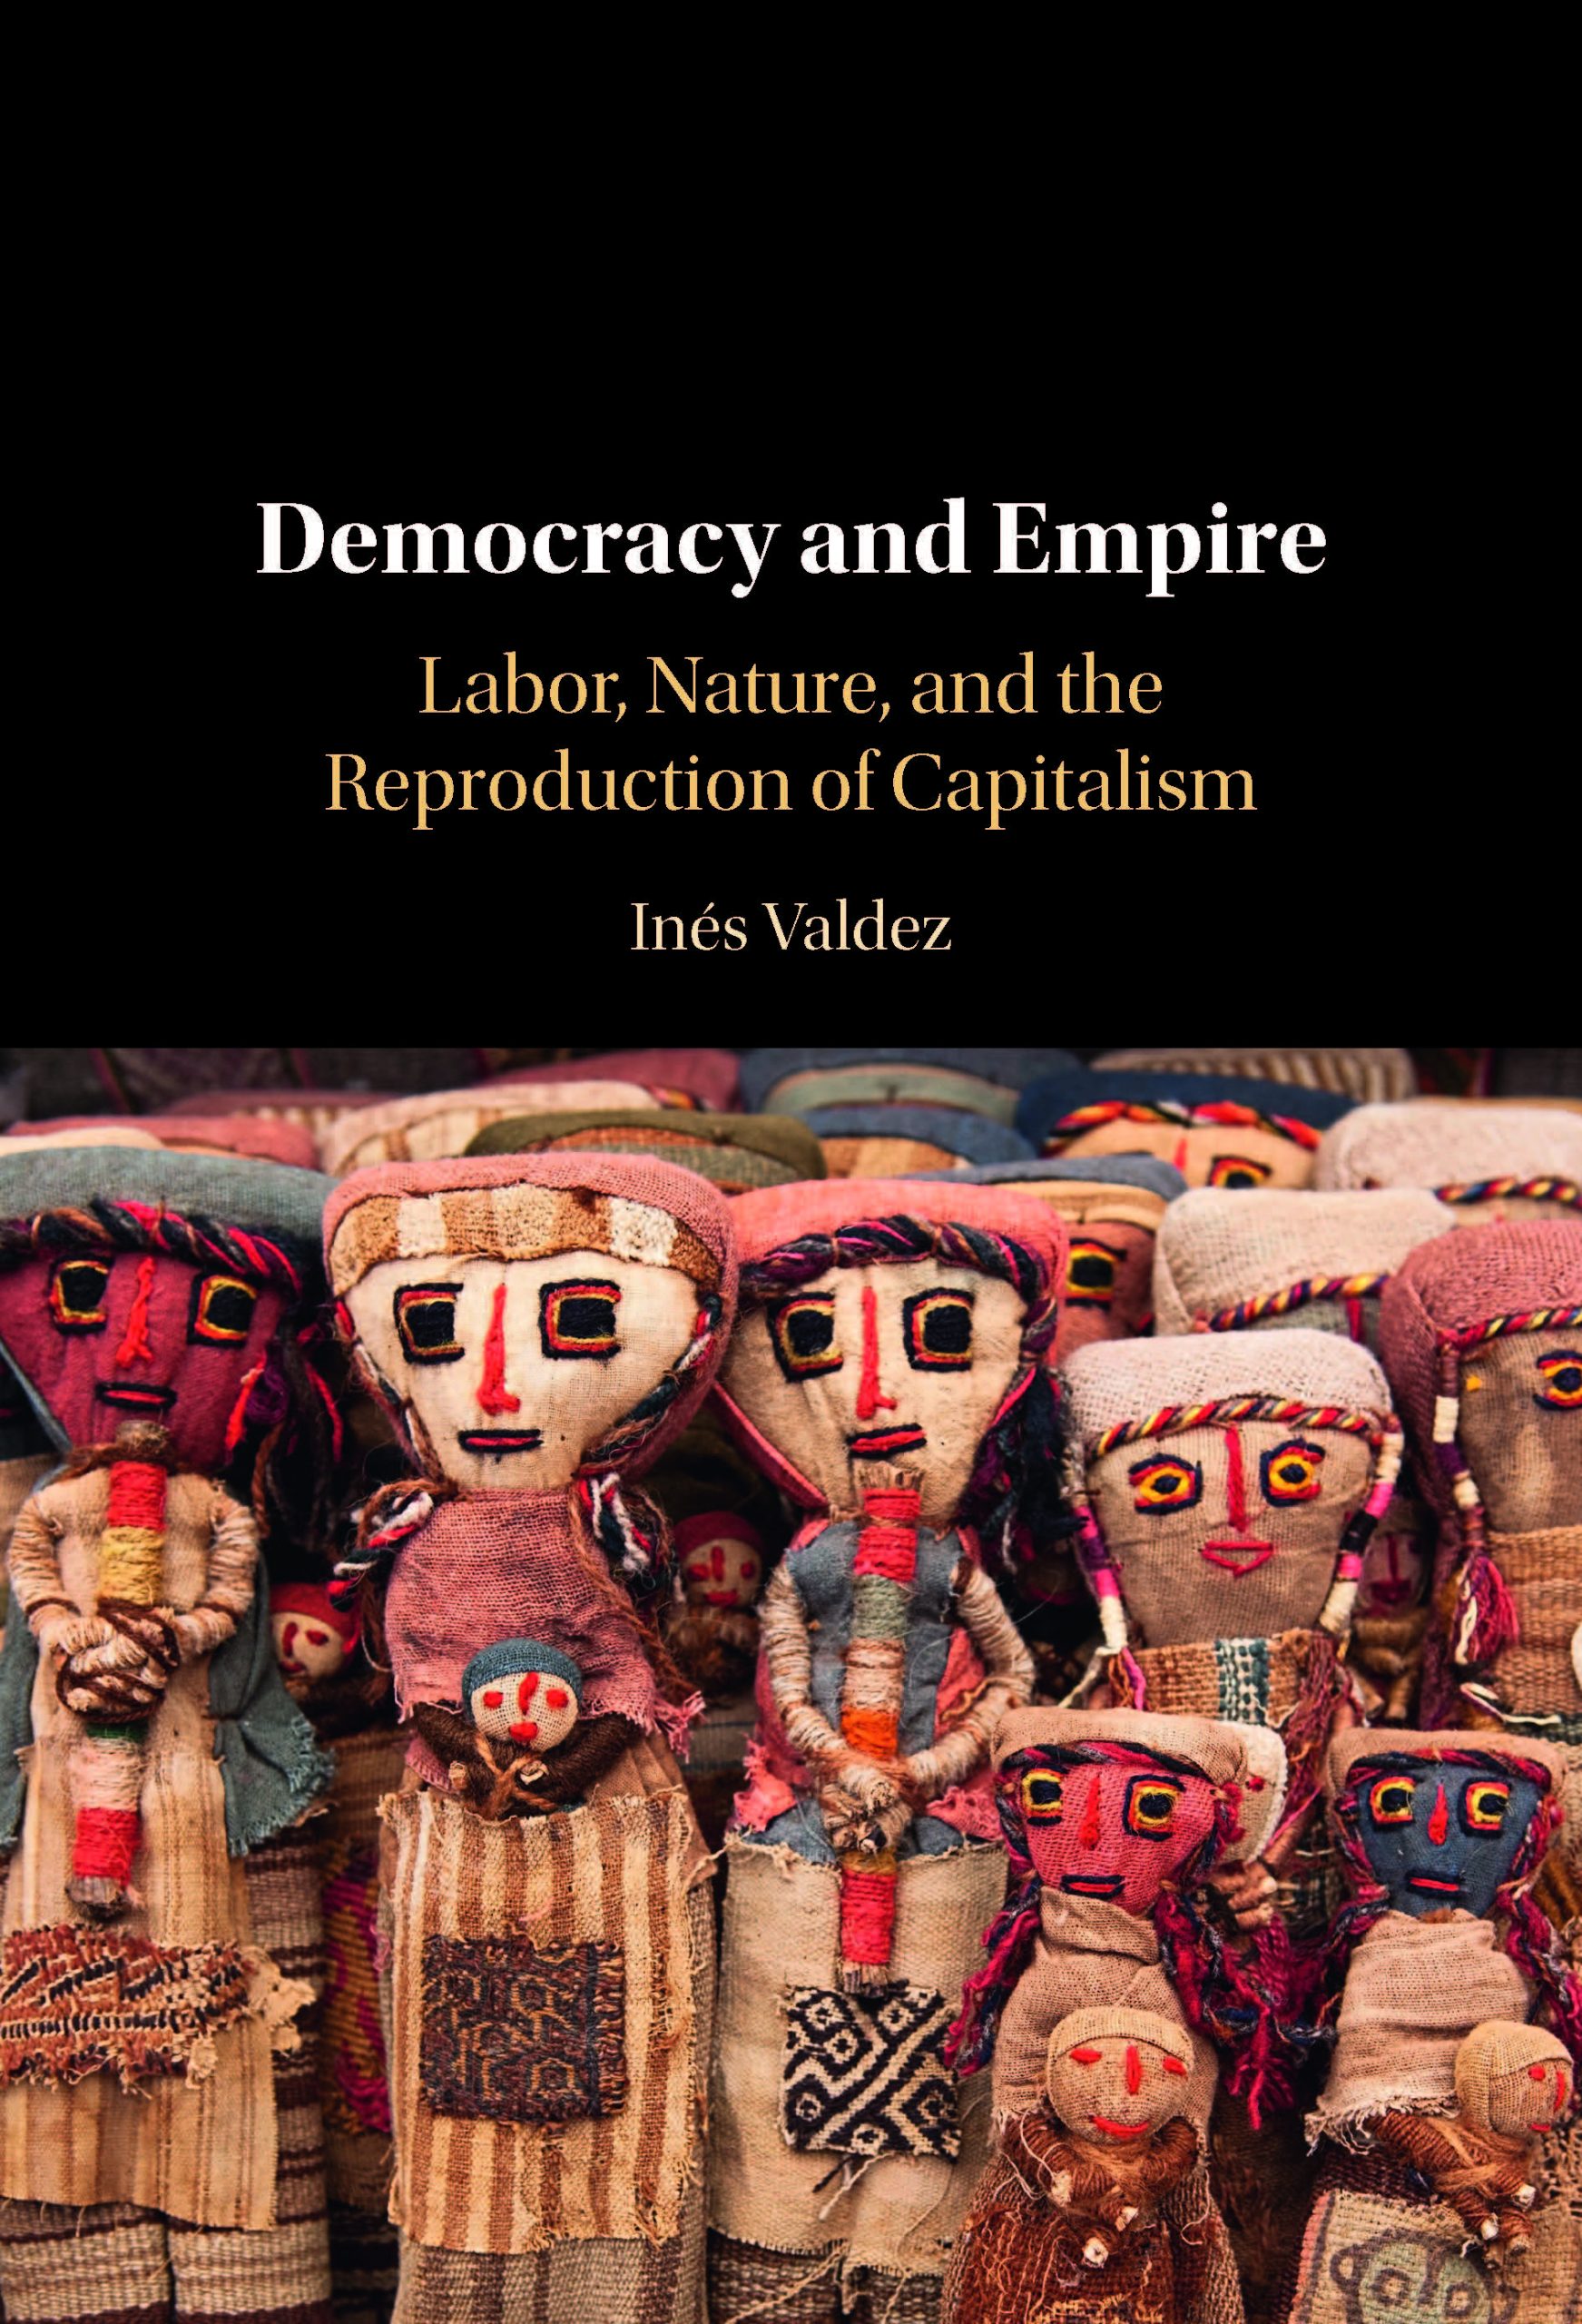 Democracy and Empire: Labor, Nature, and the Reproduction of Capitalism